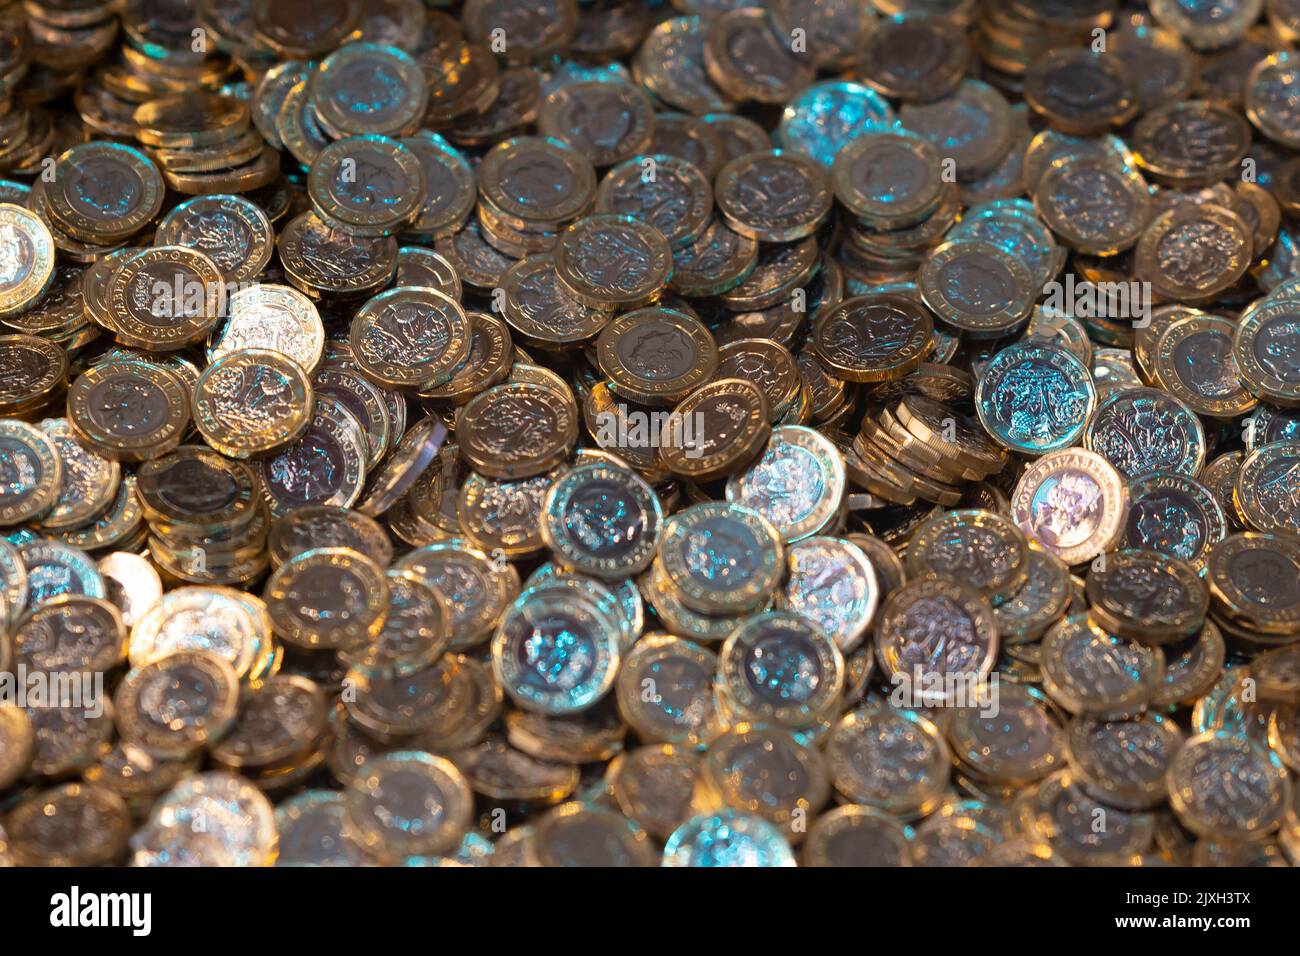 Collection of British pound coins seen from above. Stock Photo